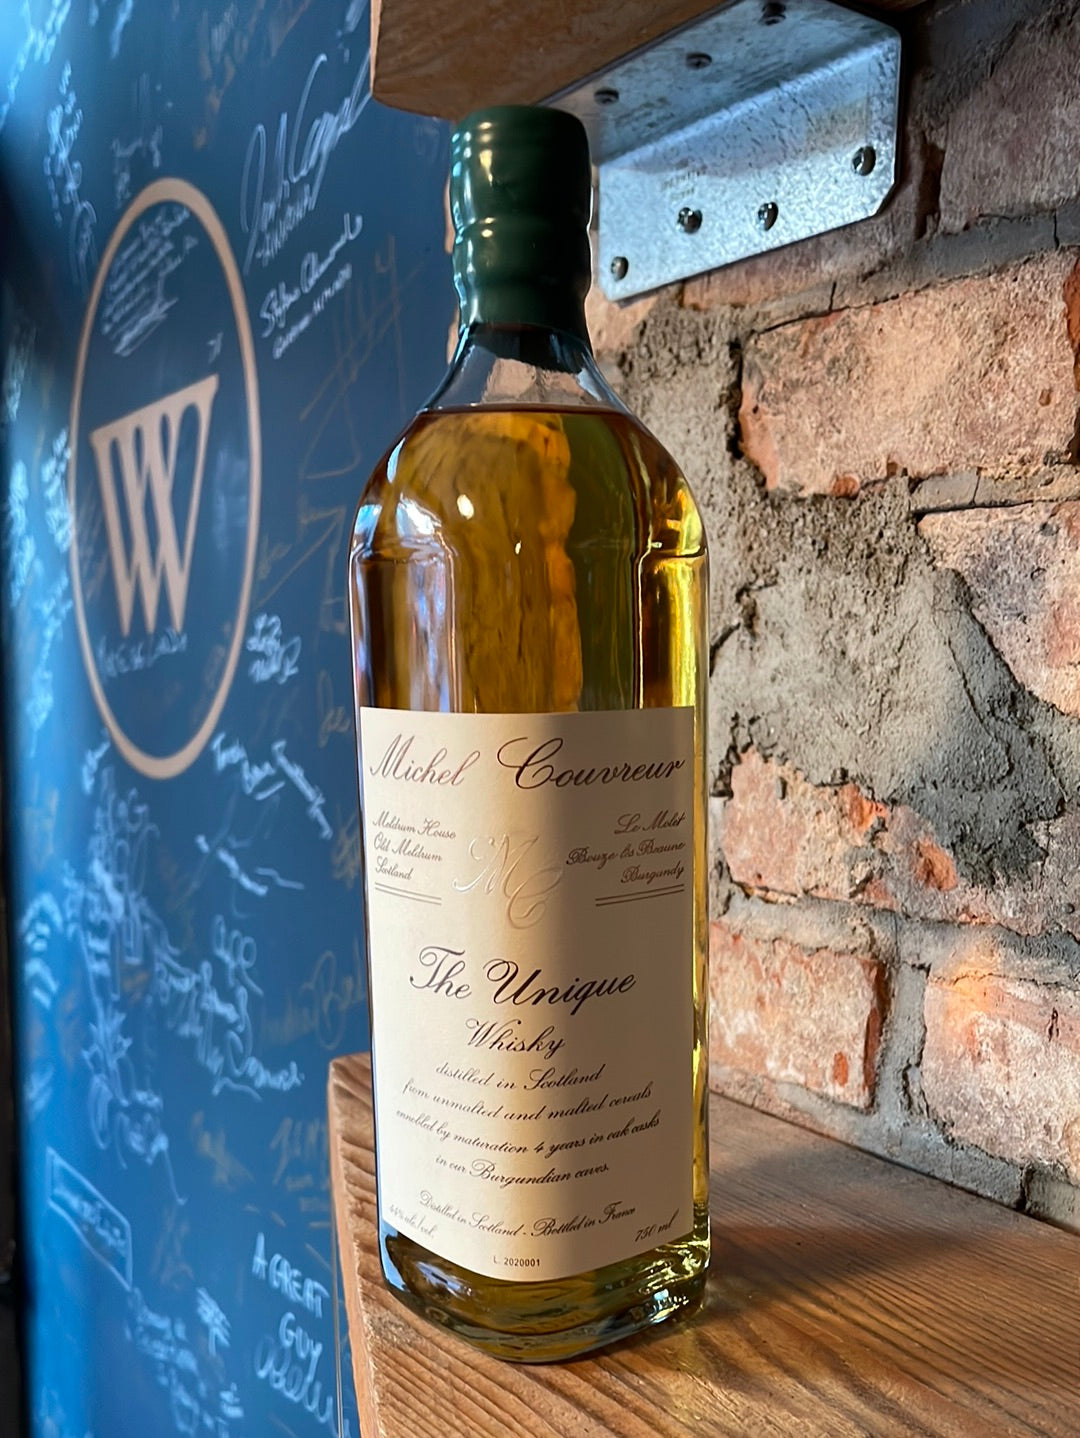 Michel Couvreur "The Unique Whisky" [NY STATE ONLY]